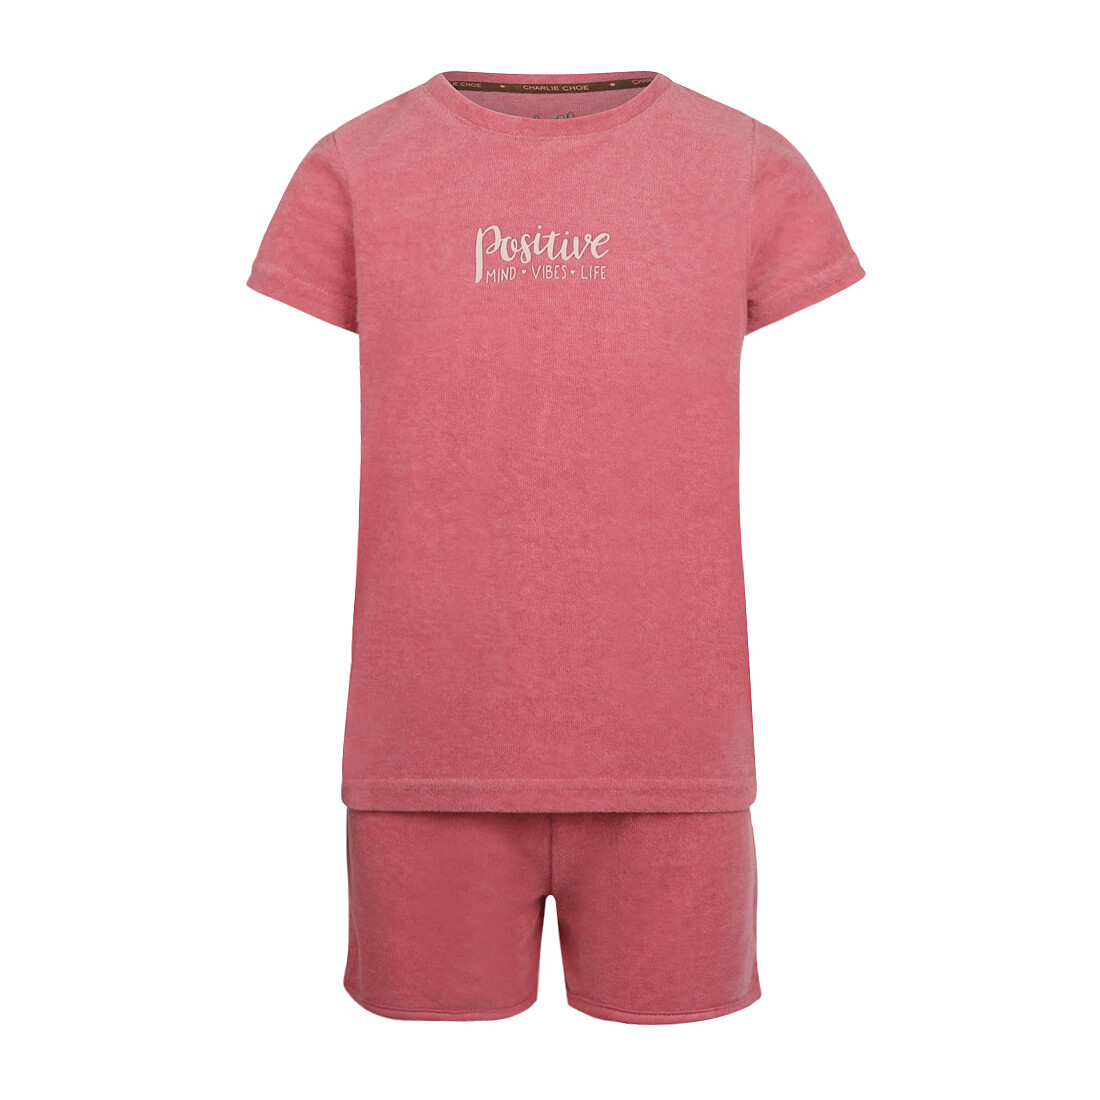 Shortama T47025-41 Rouge Pink Charlie Choe Good Luck, Size: 110/116